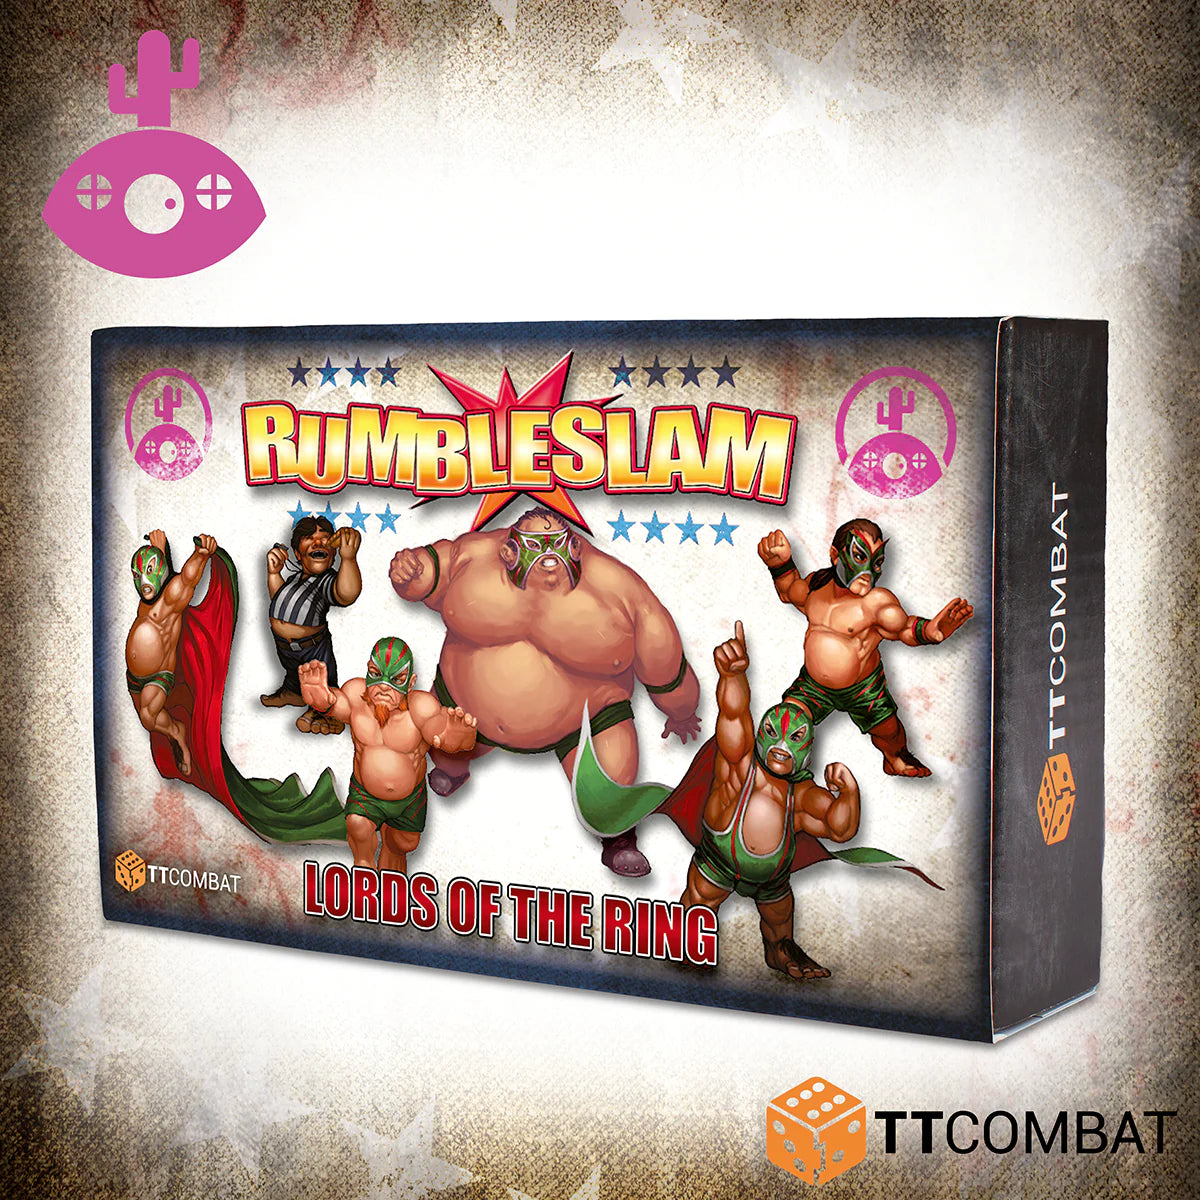 Rumbleslam: Lords of the Ring